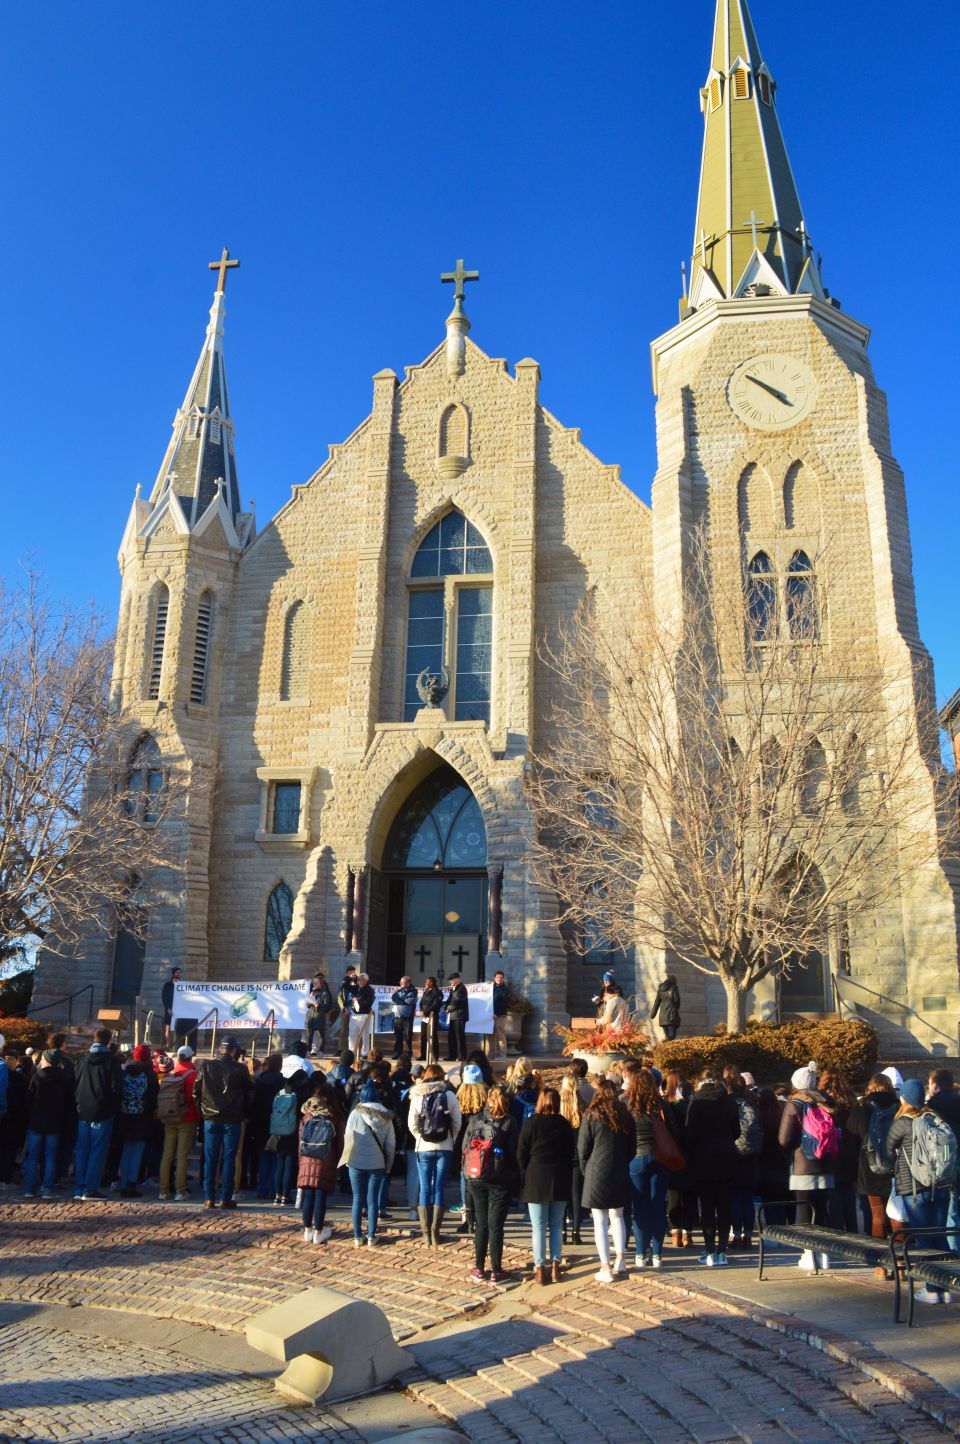 Students and others gather on the steps of St. John Church on the Creighton University campus in Omaha, Neb., Feb. 20, 2020, for a prayerful rally to call on school leaders to divest from fossil fuels. (CNS photo/courtesy Emily Burke)